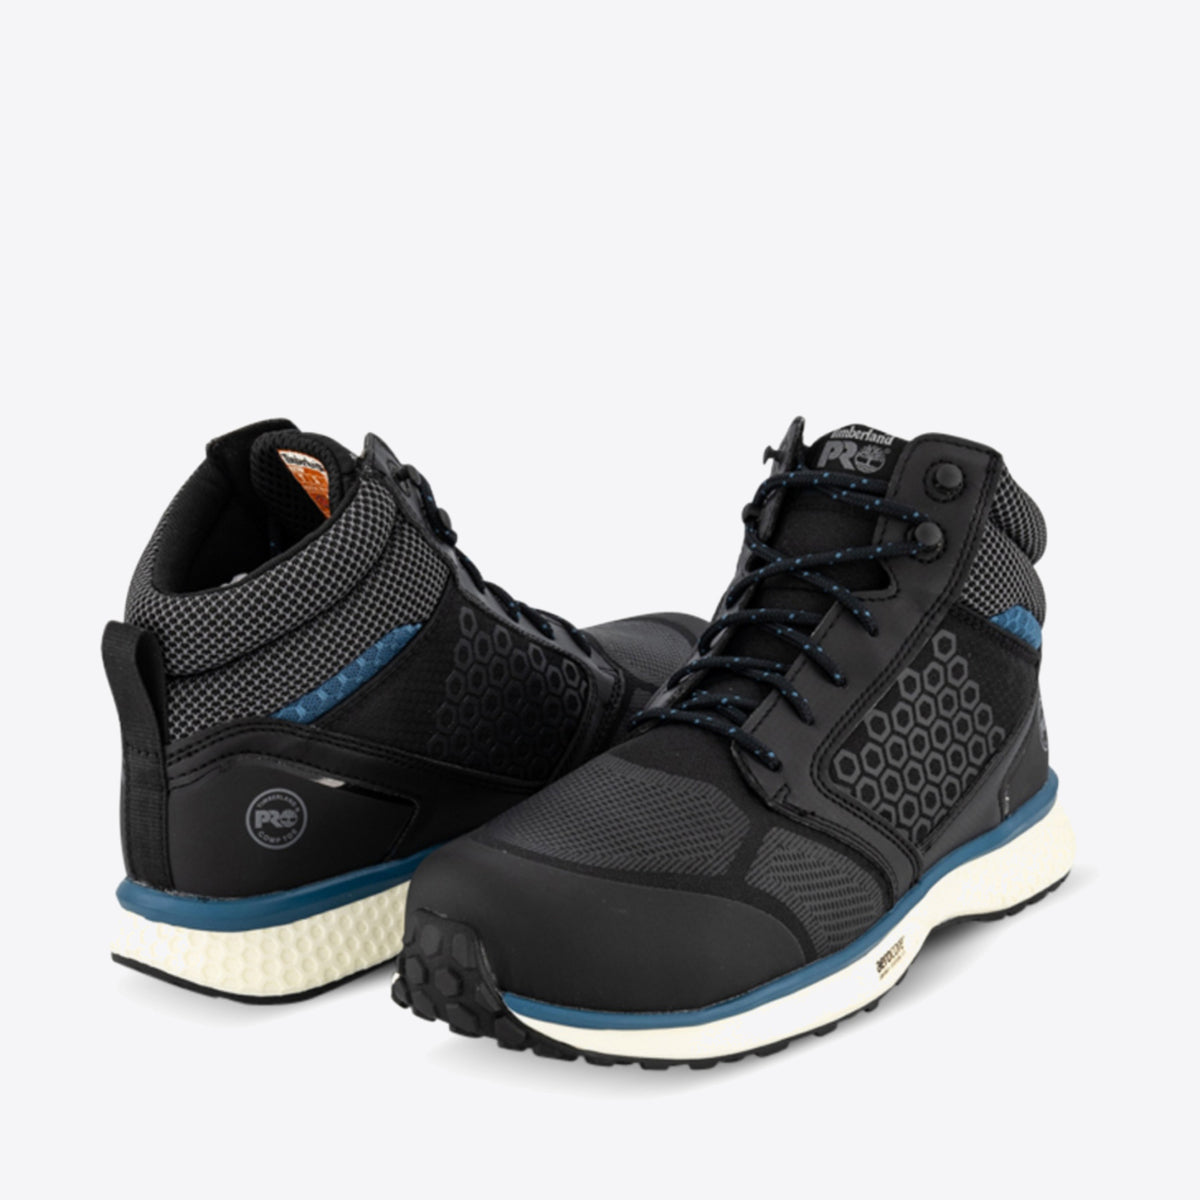 TIMBERLAND PRO Reaxion Mid Black/Blue - Image 5